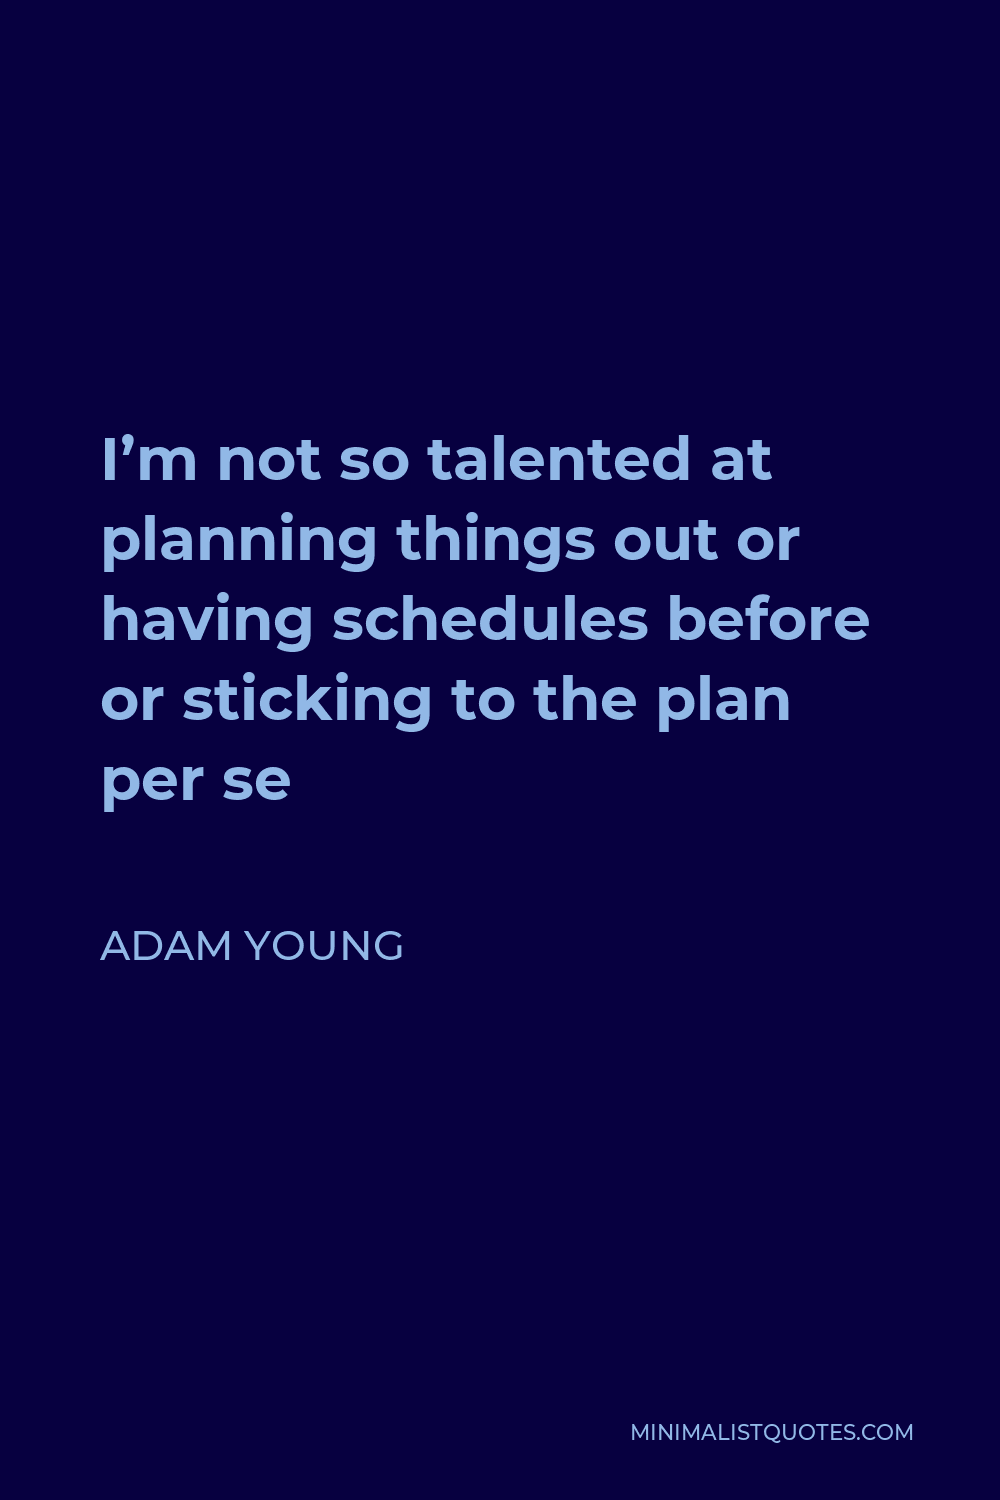 Adam Young Quote - I’m not so talented at planning things out or having schedules before or sticking to the plan per se